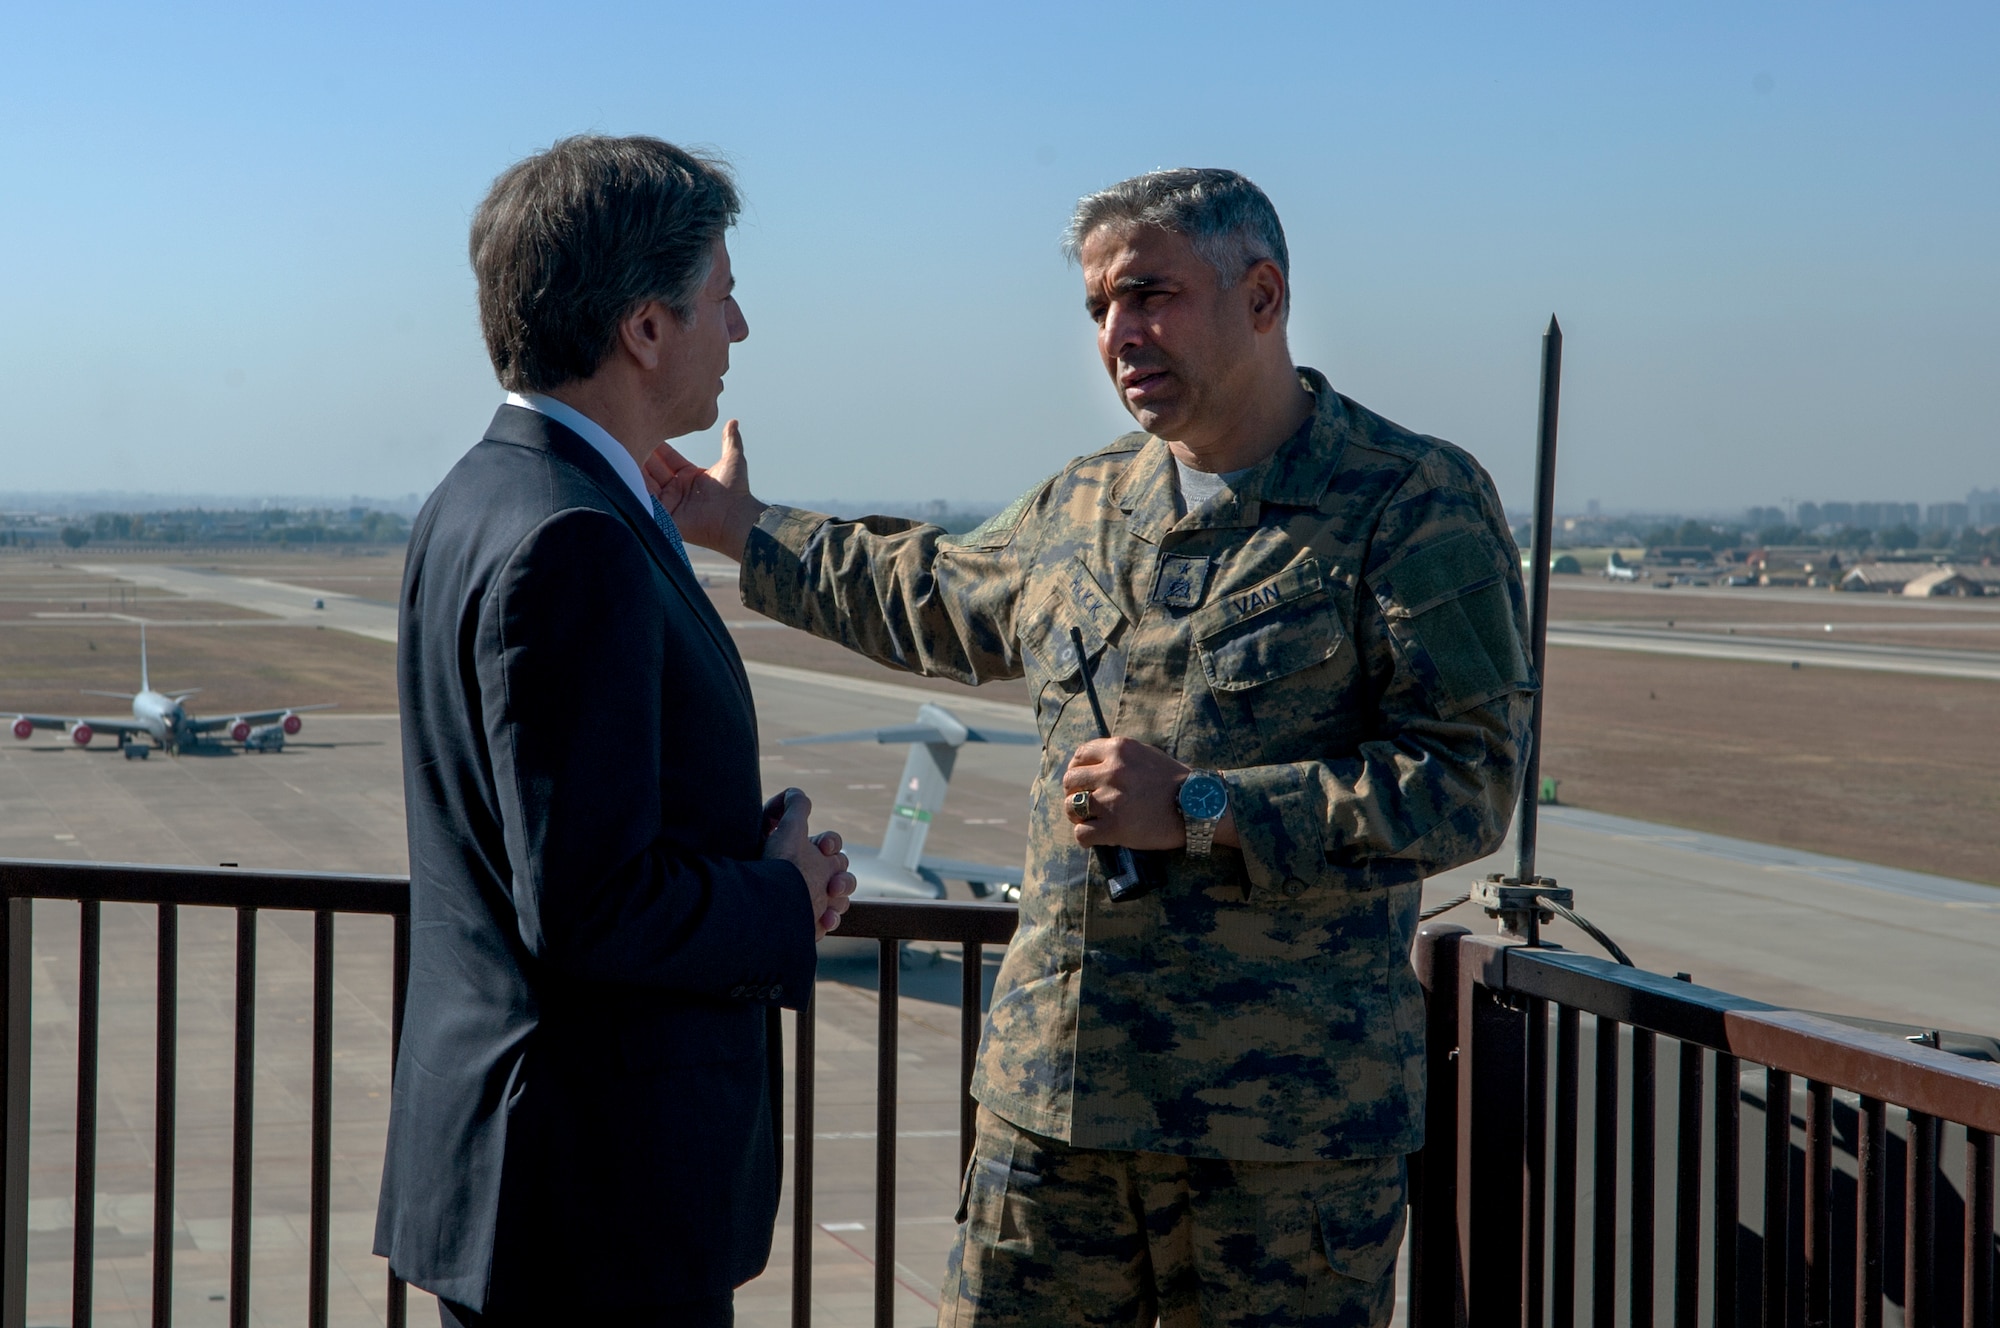 U.S. Deputy Secretary of State Antony Blinken and Brig. Gen. Bekir Ercan Van, 10th Tanker Base Command commander, discuss airfield management Nov. 20, 2015, at Incirlik Air Base, Turkey. Incirlik AB is a Turkish base located in NATO’s southern region and home to the Turkish air force’s 10th Tanker Base command as well as U.S. Air Force’s 39th Air Base Wing. (U.S. Air Force photo by Staff Sgt. Jack Sanders/Released)